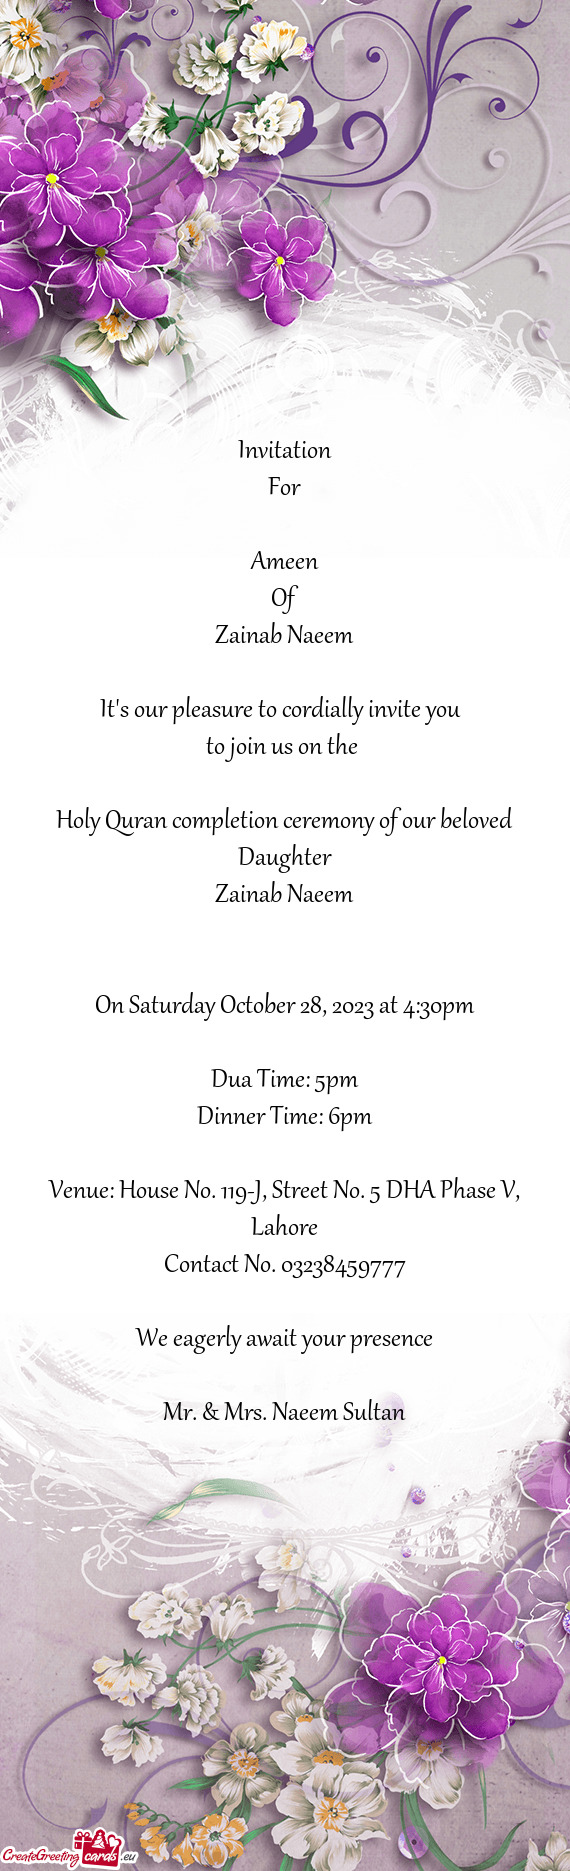 Holy Quran completion ceremony of our beloved Daughter